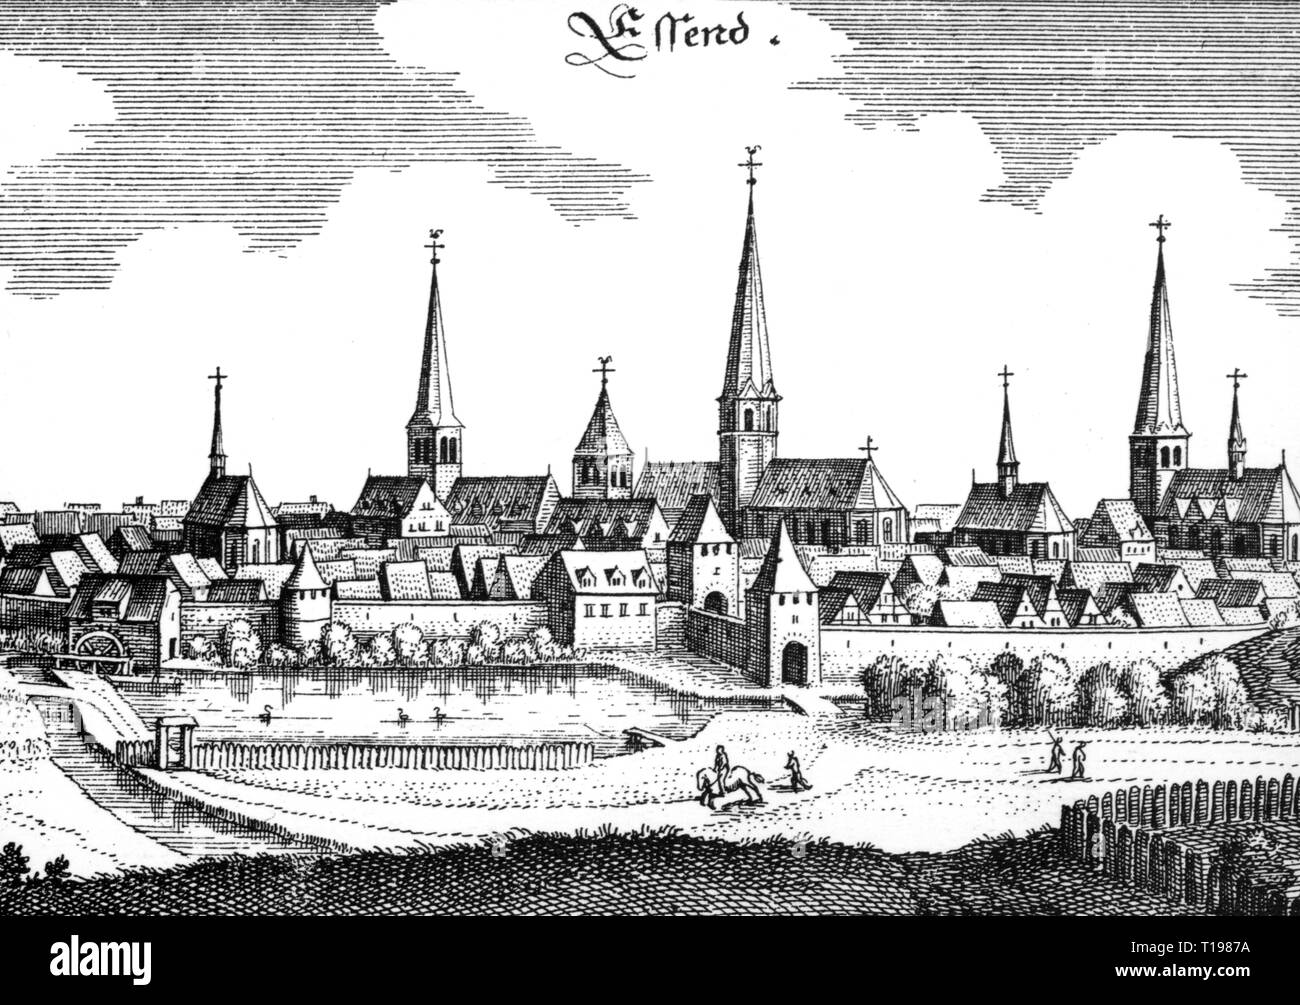 geography / travel historic, Germany, cities and communities, Essen, view, based on copper engraving by Matthaeus Merian the Elder, 'Topographia Germaniae', volume 8, 'Topographia Westphaliae', 1647 / 1660, city, city view, cityscape, city views, cityscapes, townscape, townscapes, churches, church, Essen Cathedral, city fortifications, city wall, city walls, city gate, city gates, Steeler gate, lake, lakes, people, abbey Essen, Women's Convent, princely abbey, clerical territory, clergy, imperial immediacy, Holy Roman Empire, HRE, Westphalian Imperial , Artist's Copyright has not to be cleared Stock Photo